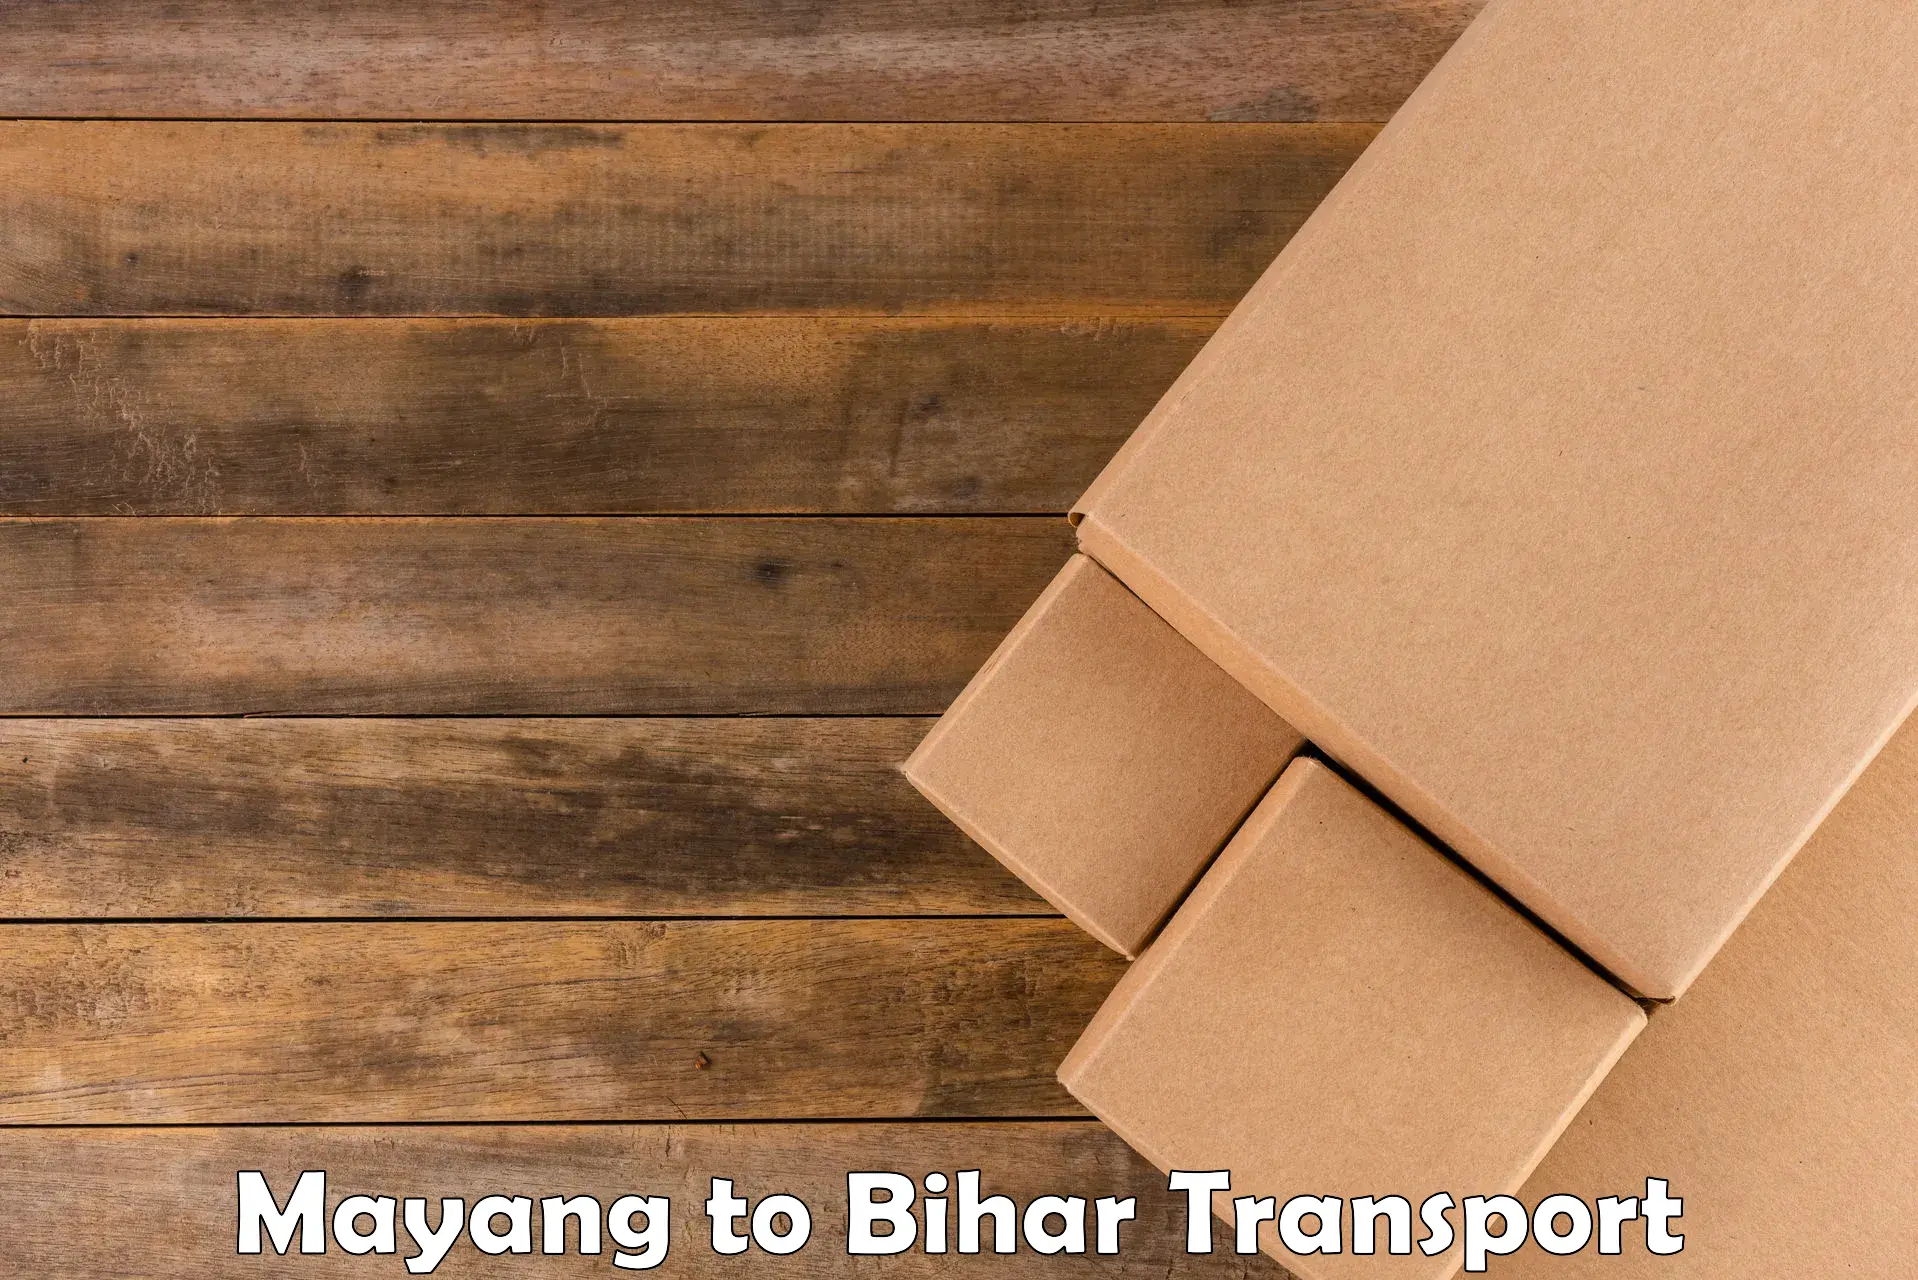 Cargo train transport services in Mayang to Bhorey